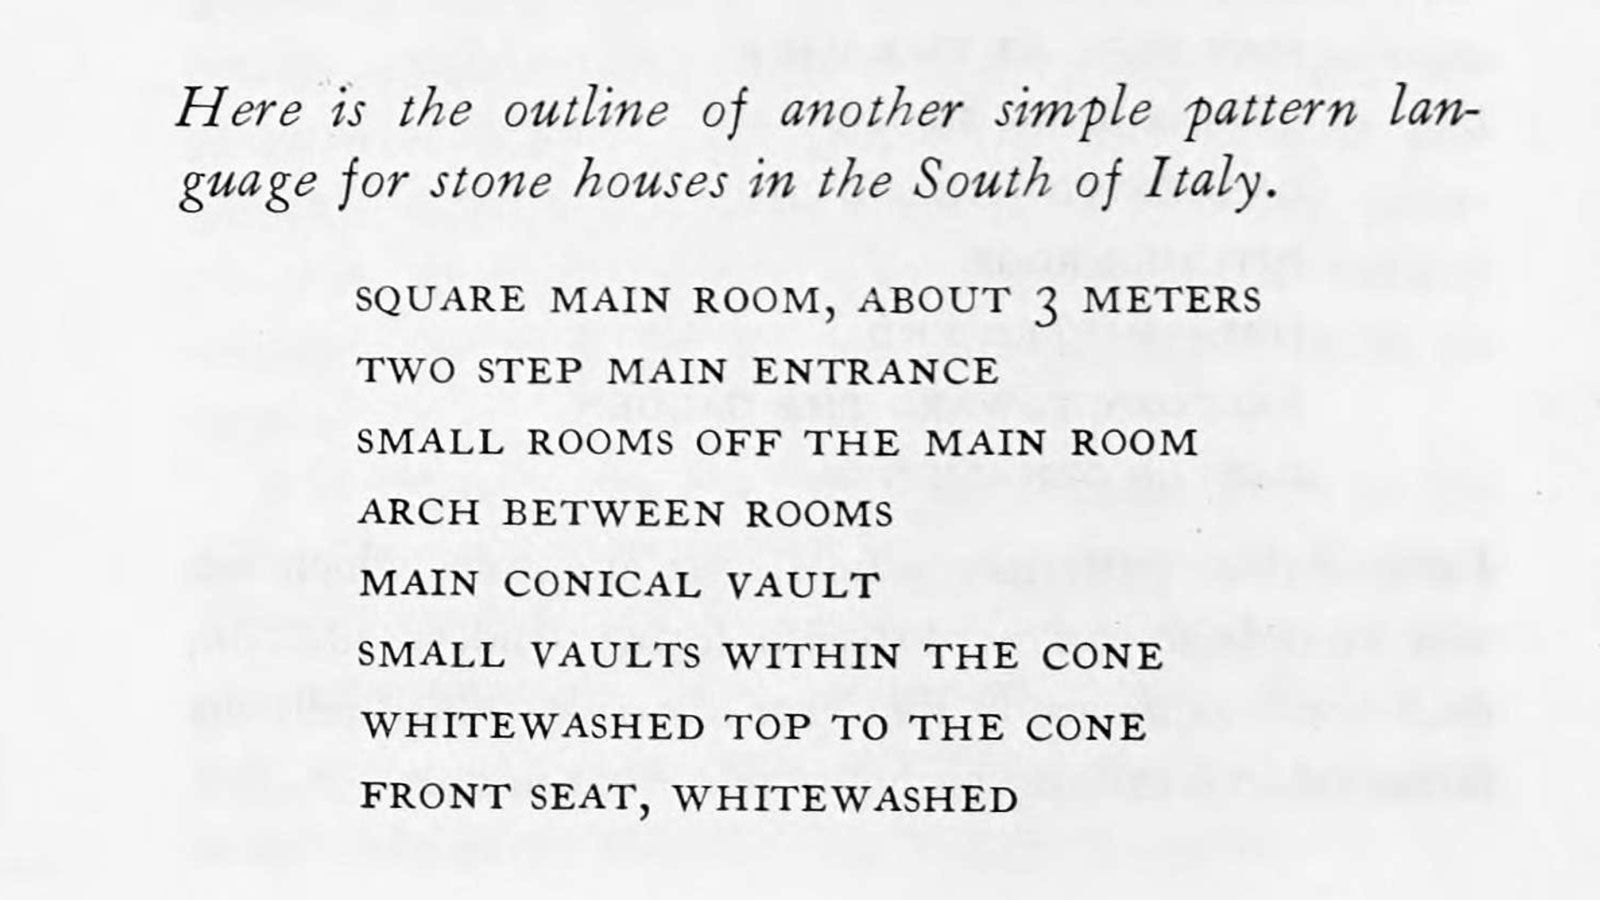 Pattern language for stone houses in the south of Italy